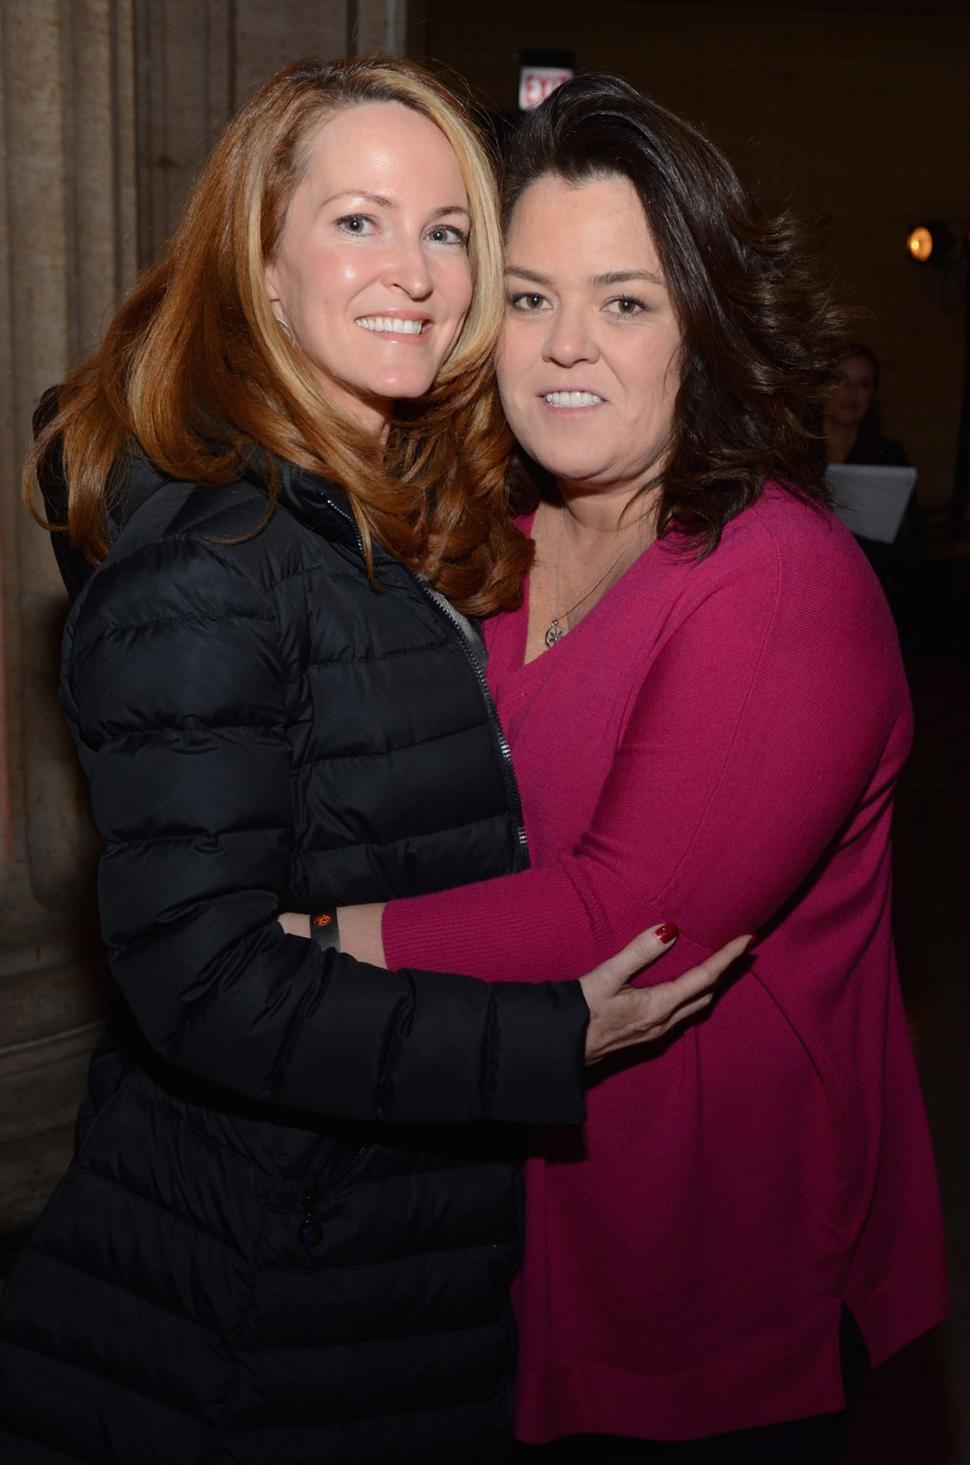 Rosie O'Donnell (right) and her second wife Michelle Rounds have called it quits.